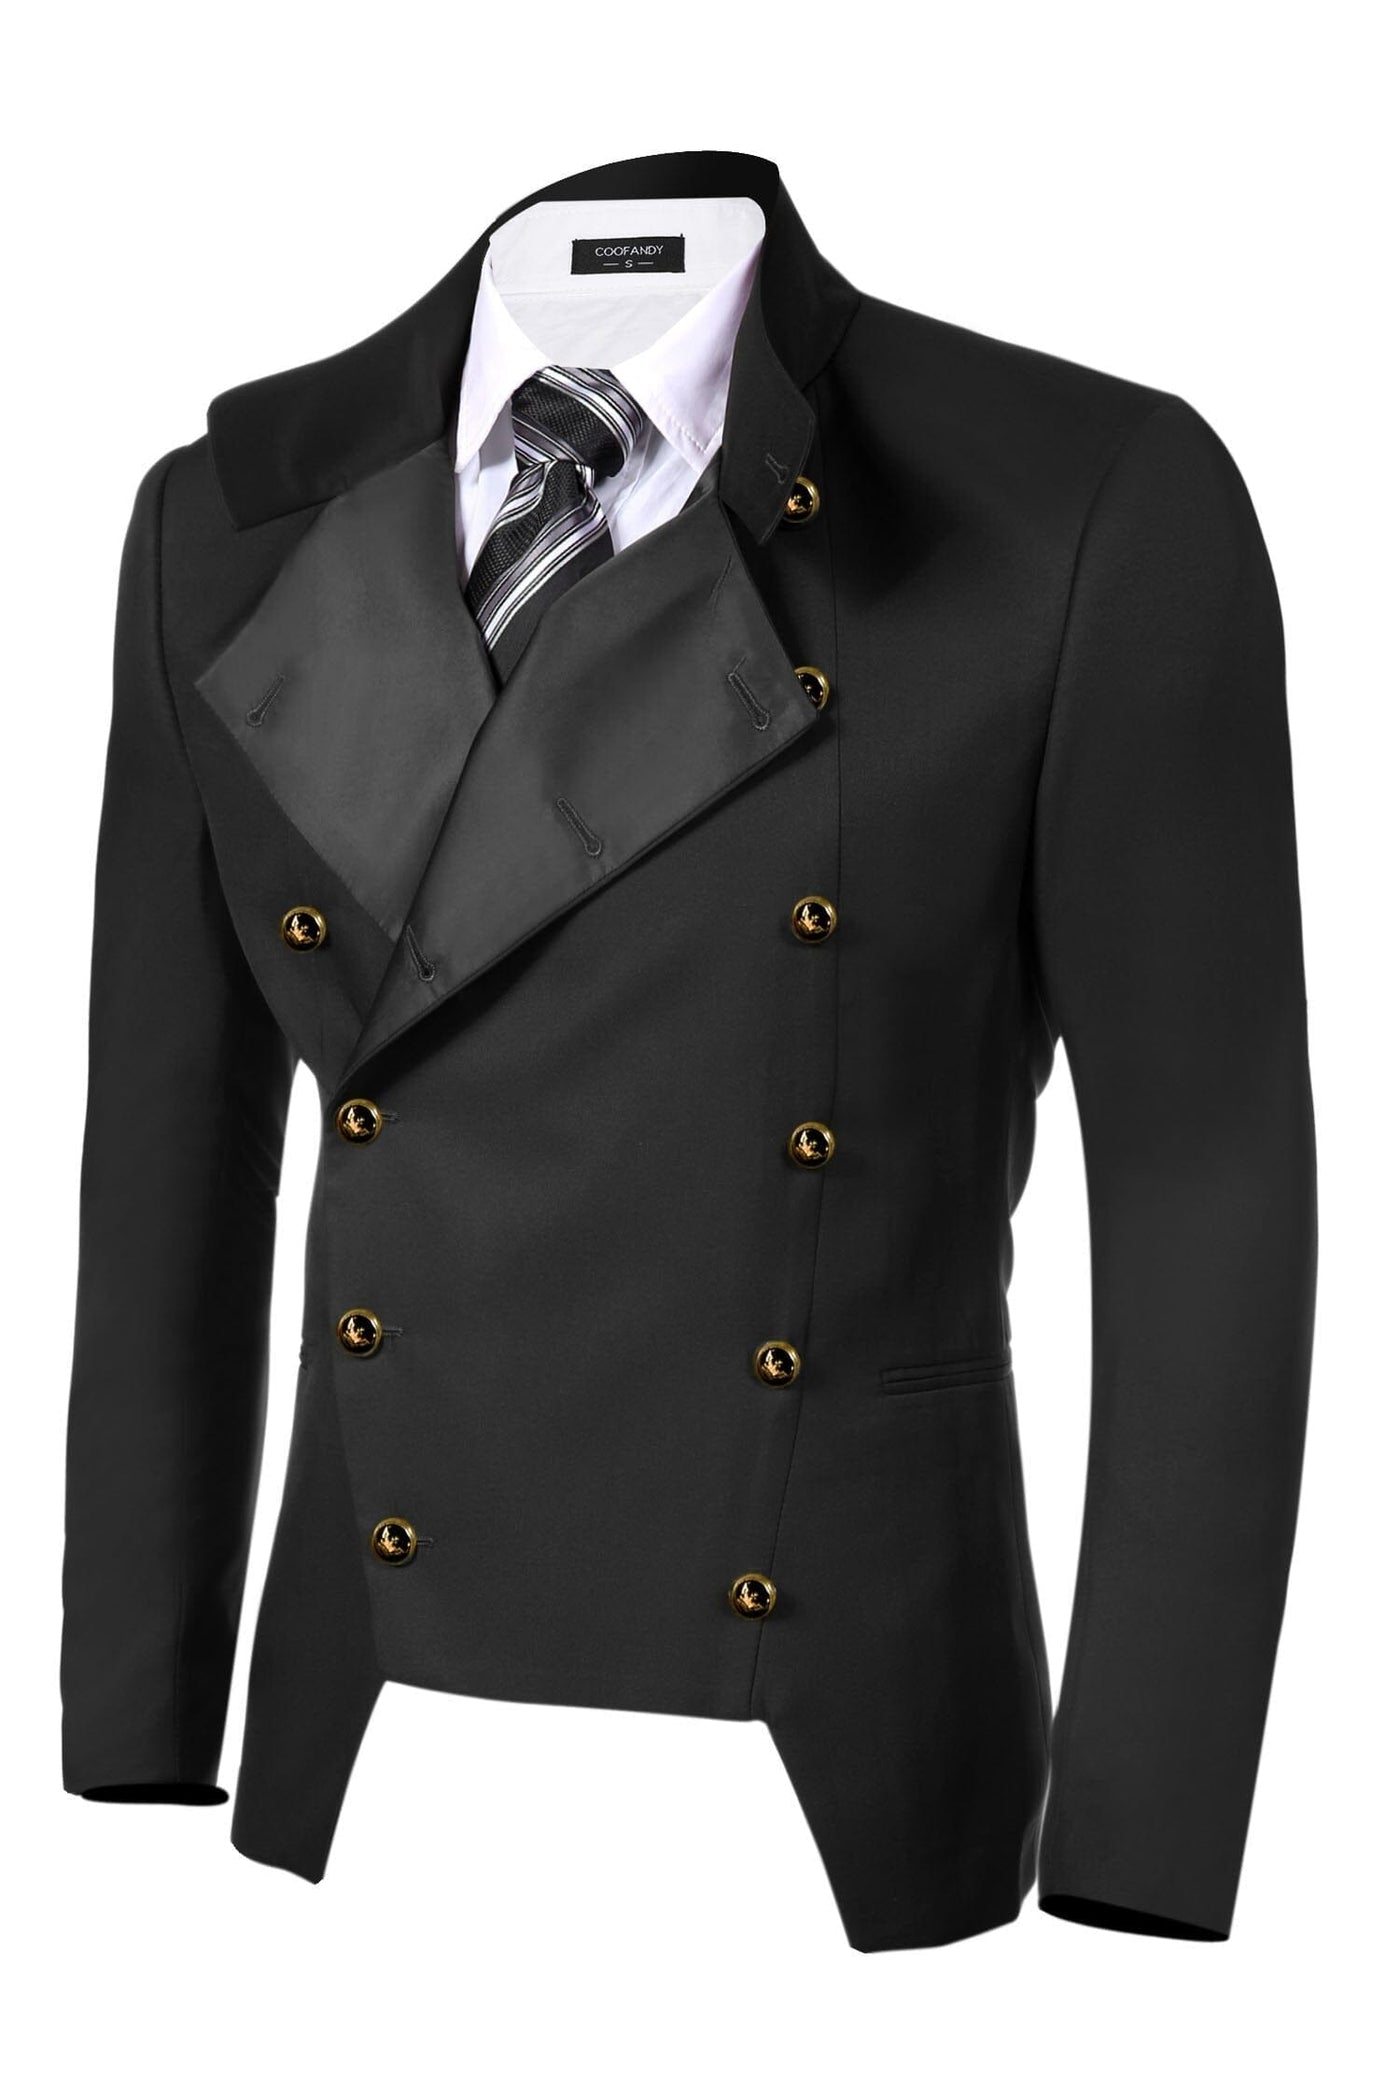 Coofandy Double-Breasted Blazer (US Only) Blazer coofandy Black S 